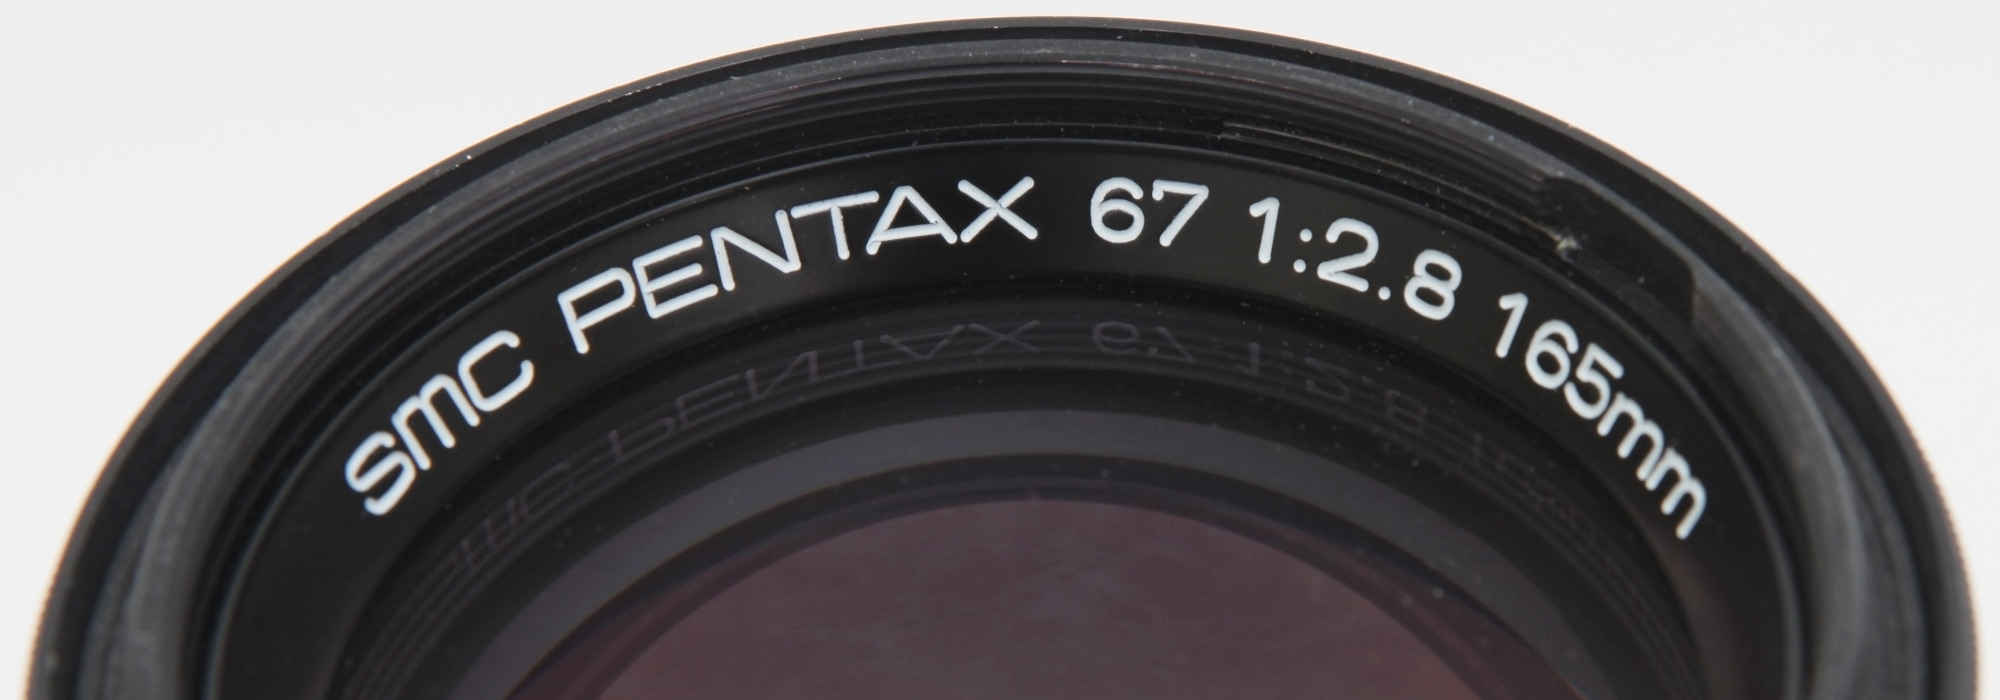 Pentax 67 105mm F2.4: Lens review, Details, Experience, Bokeh, Samples